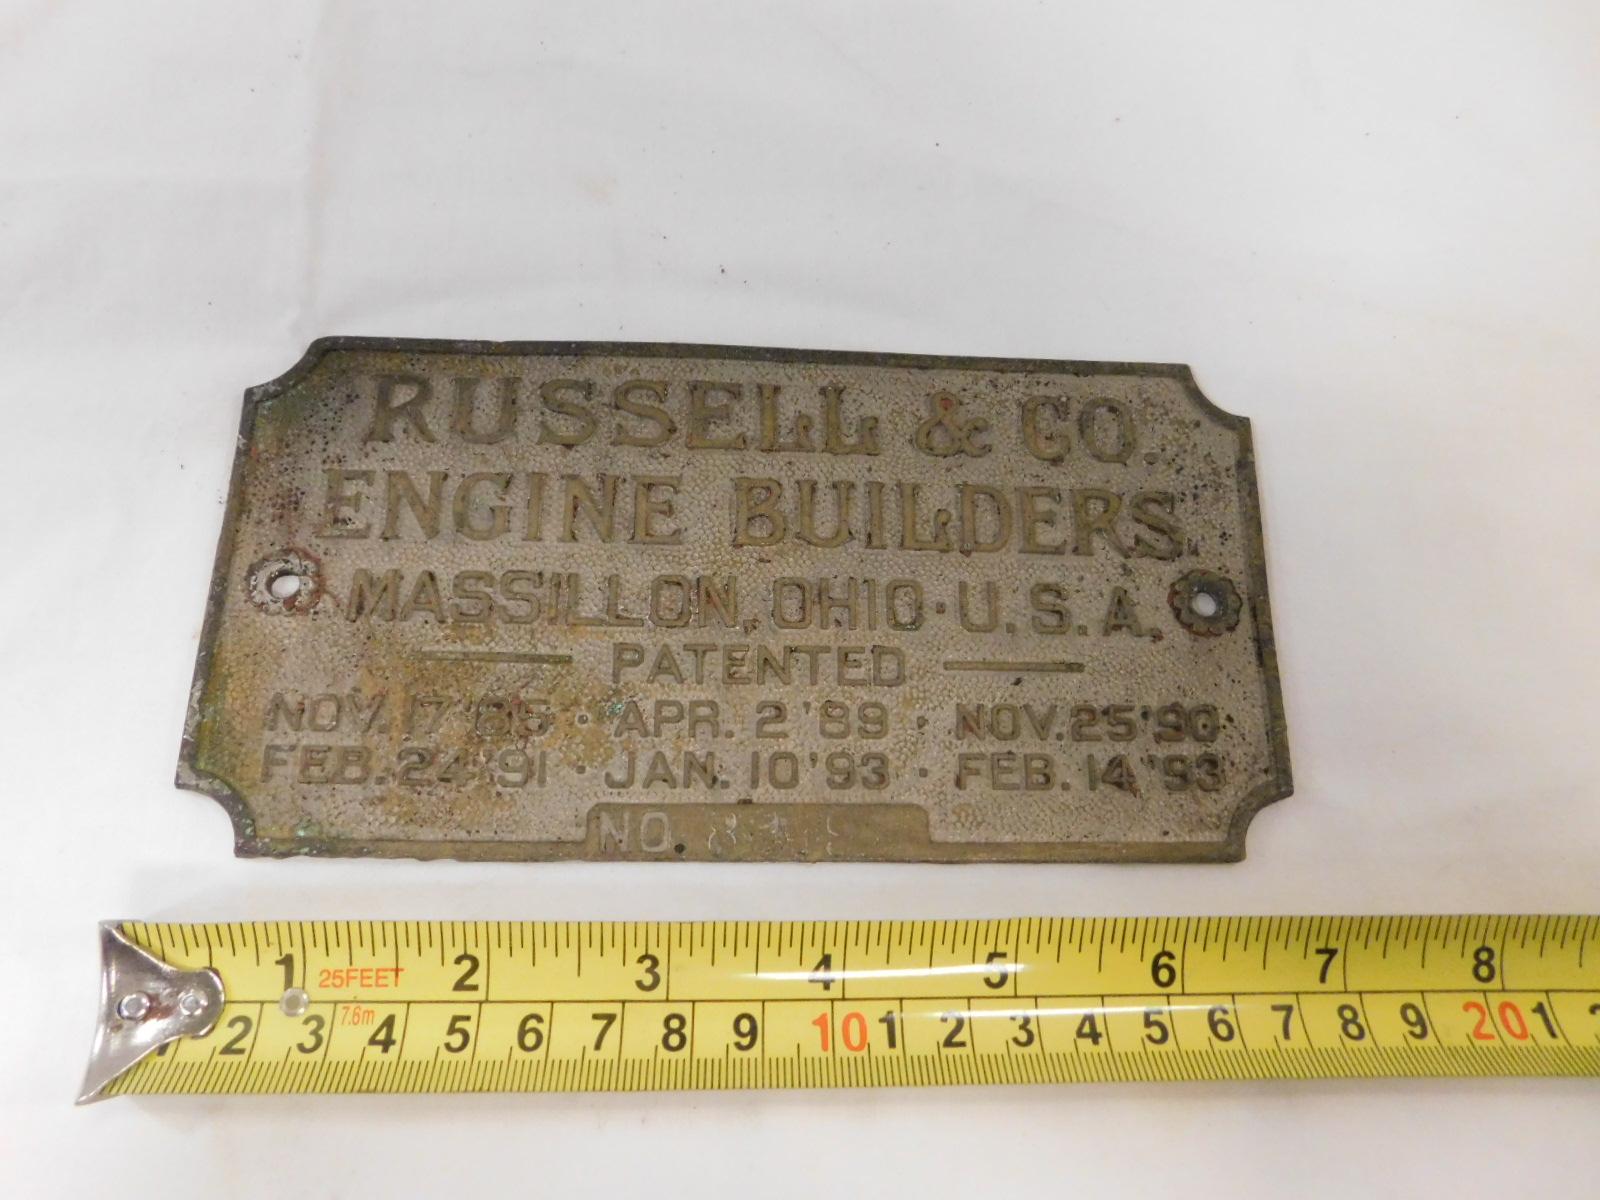 METAL RUSSELL & CO. ENGINE BUILDERS NAME PLATE